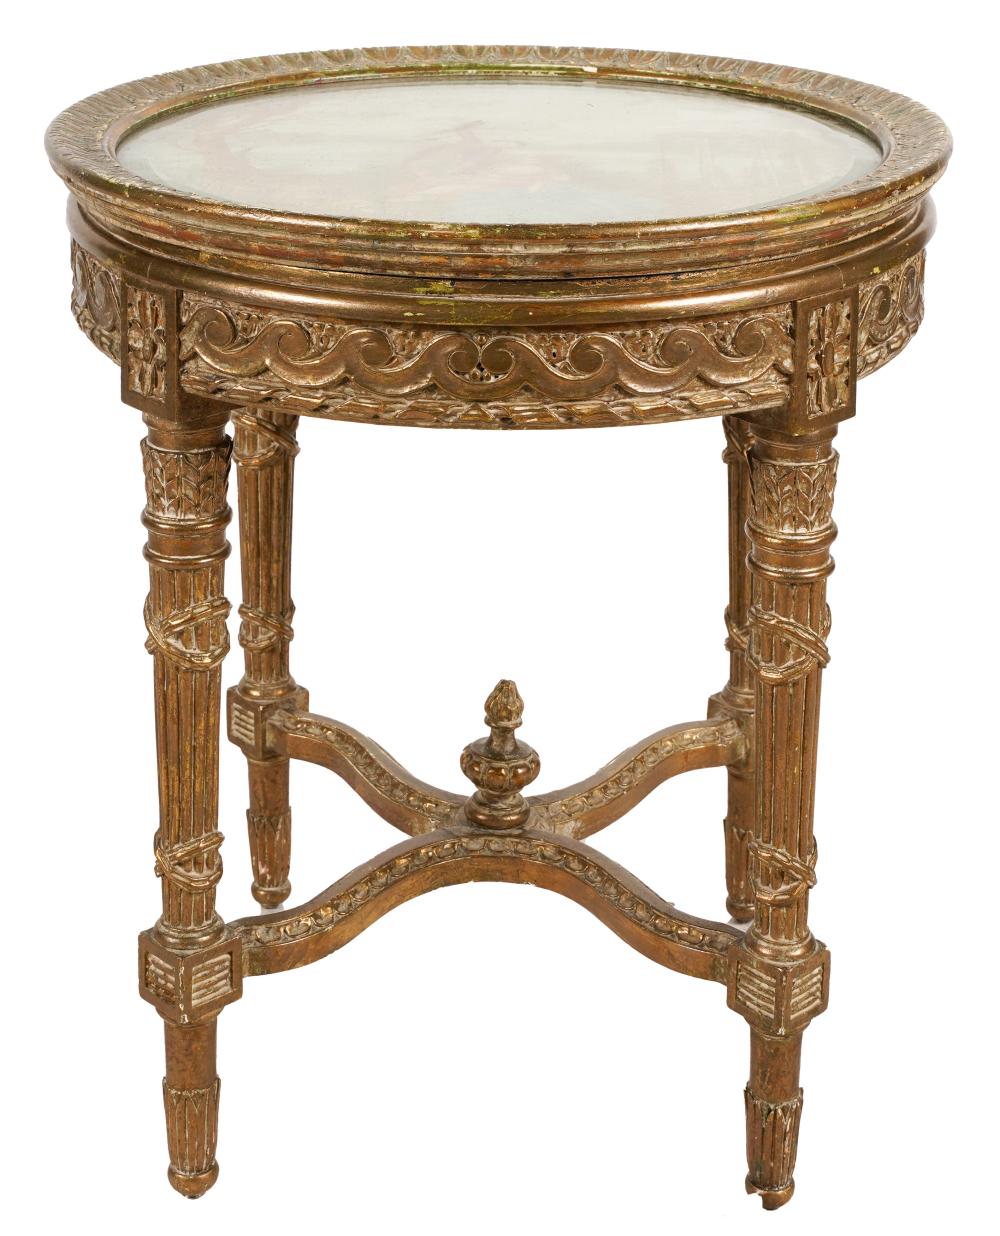 NEOCLASSICAL STYLE GILTWOOD GUERIDONthe 300830